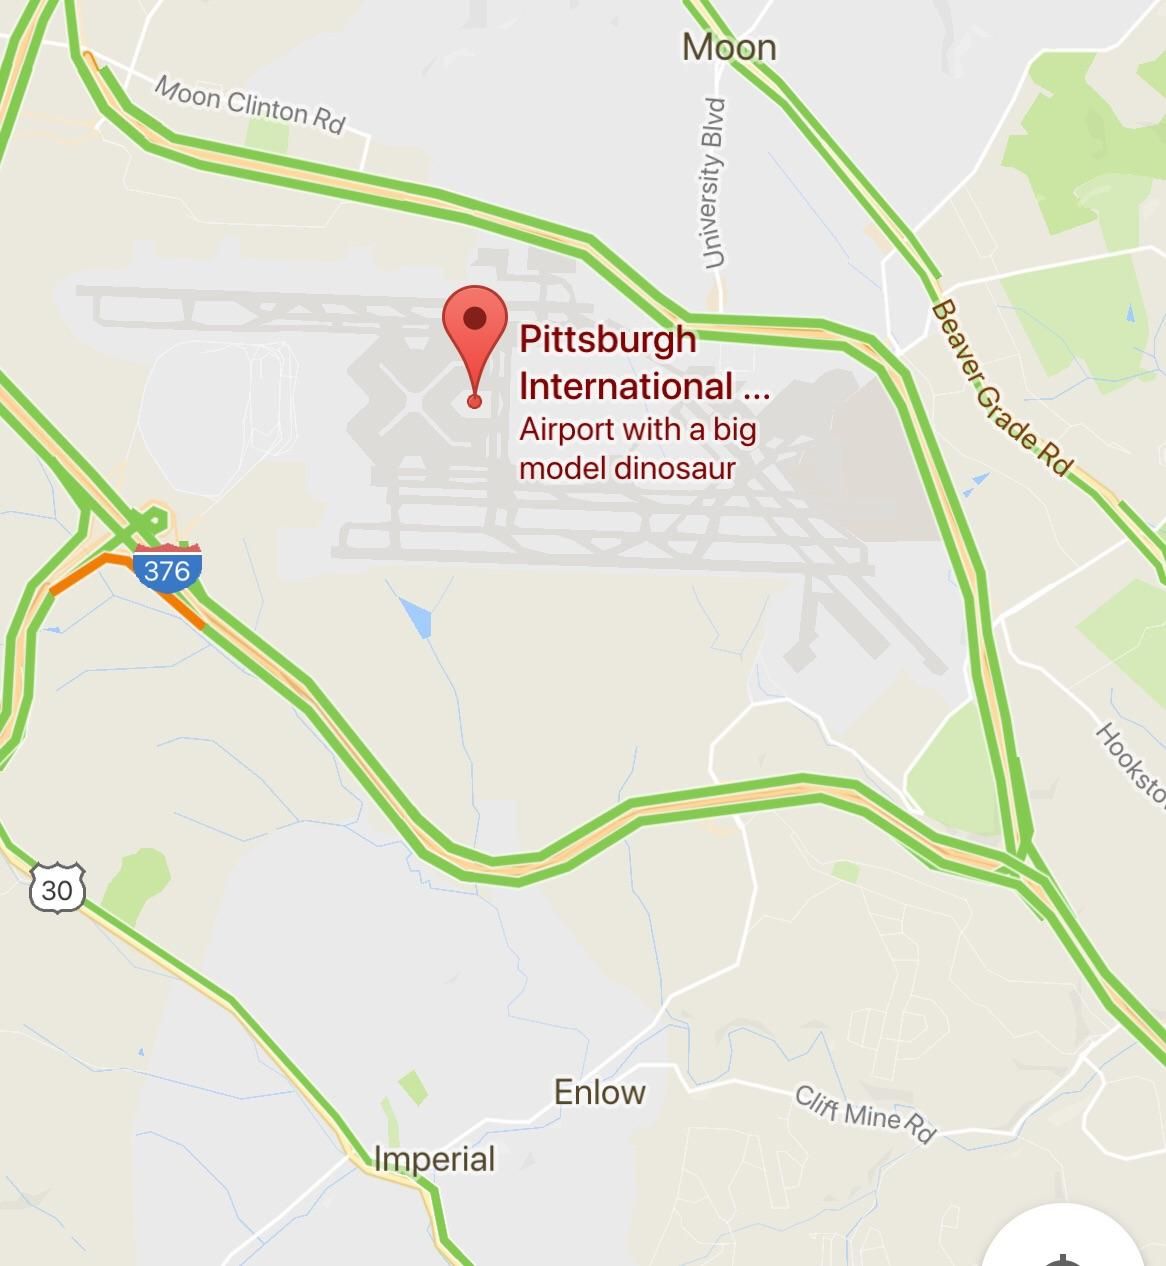 Apparently this is the most important information about the Pittsburgh airport.